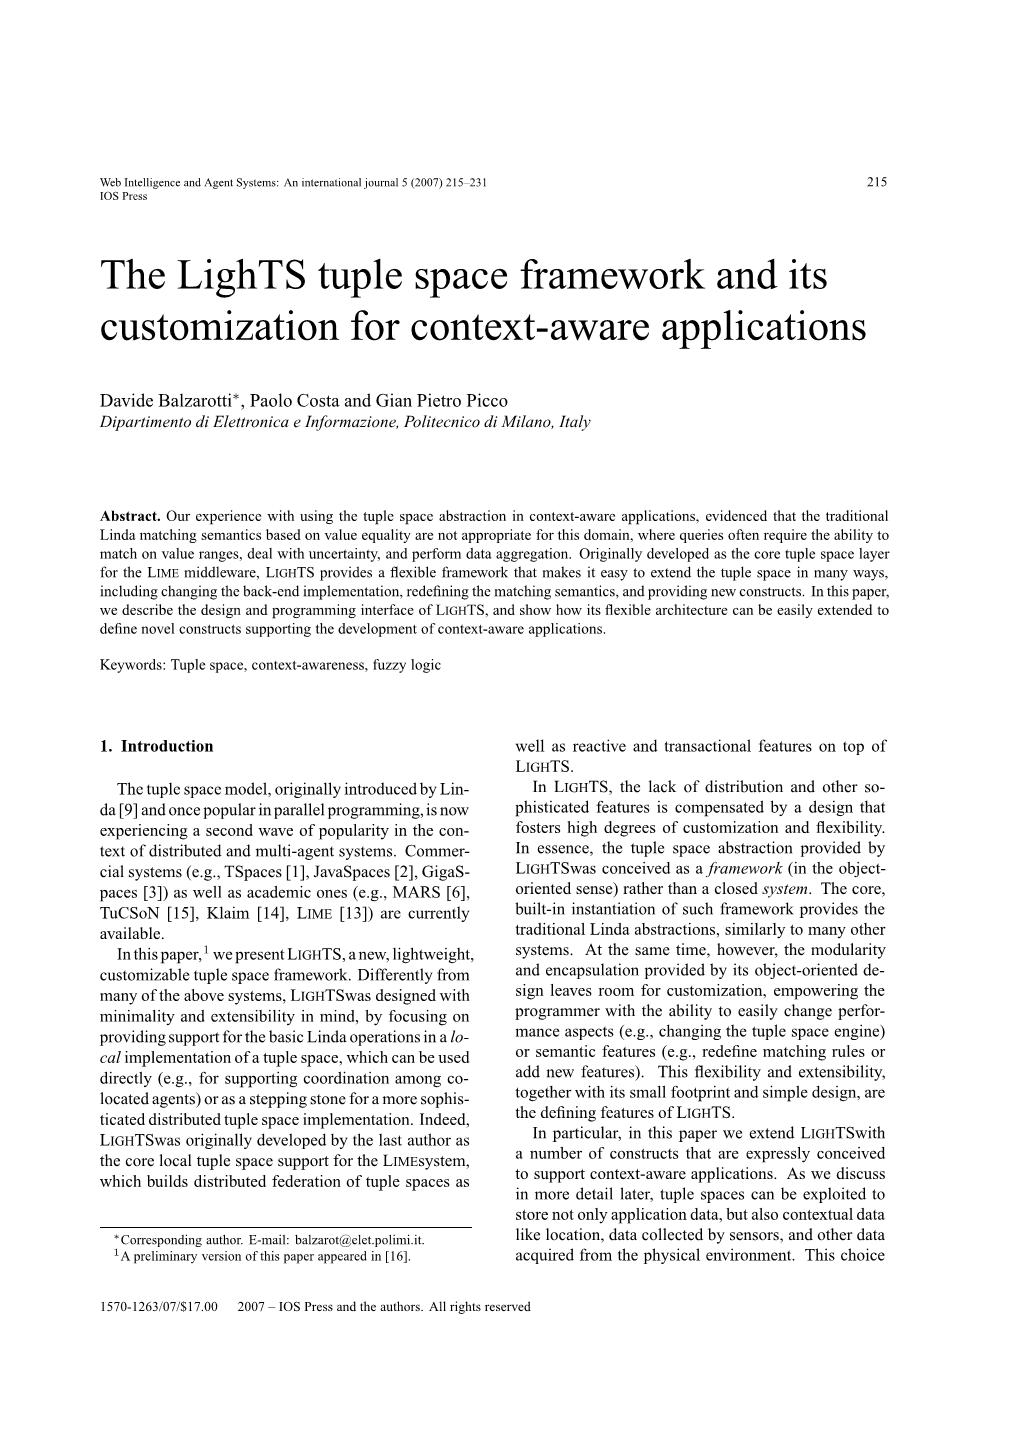 The Lights Tuple Space Framework and Its Customization for Context-Aware Applications